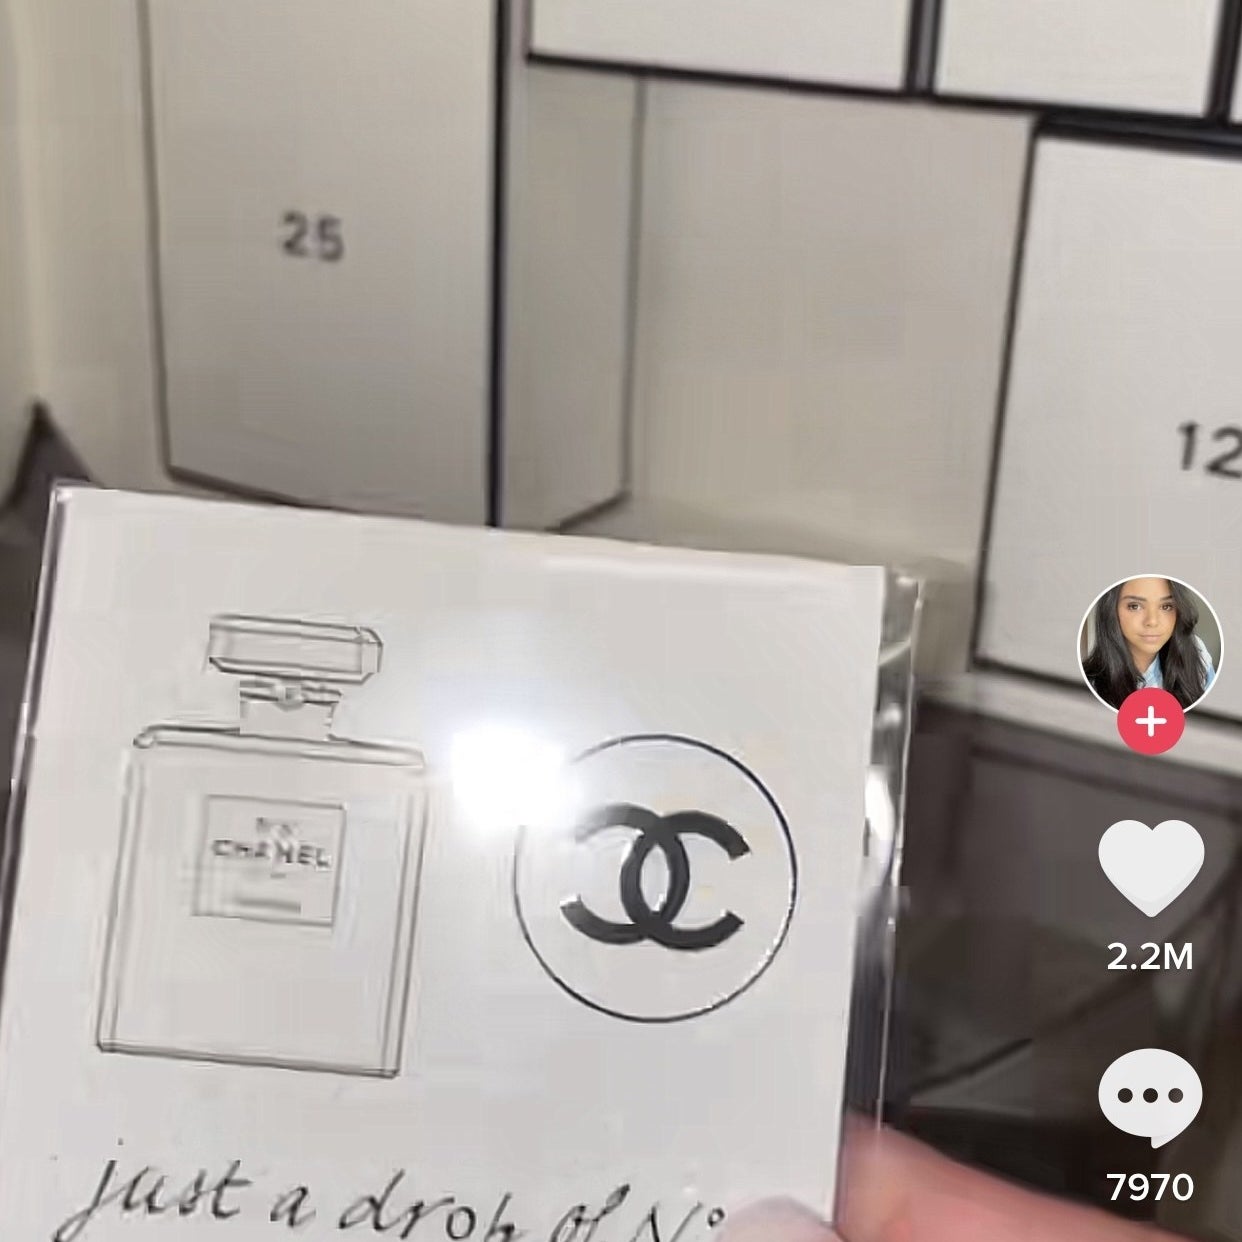 Chanel Responds to Expensive Advent Calendar Controversy